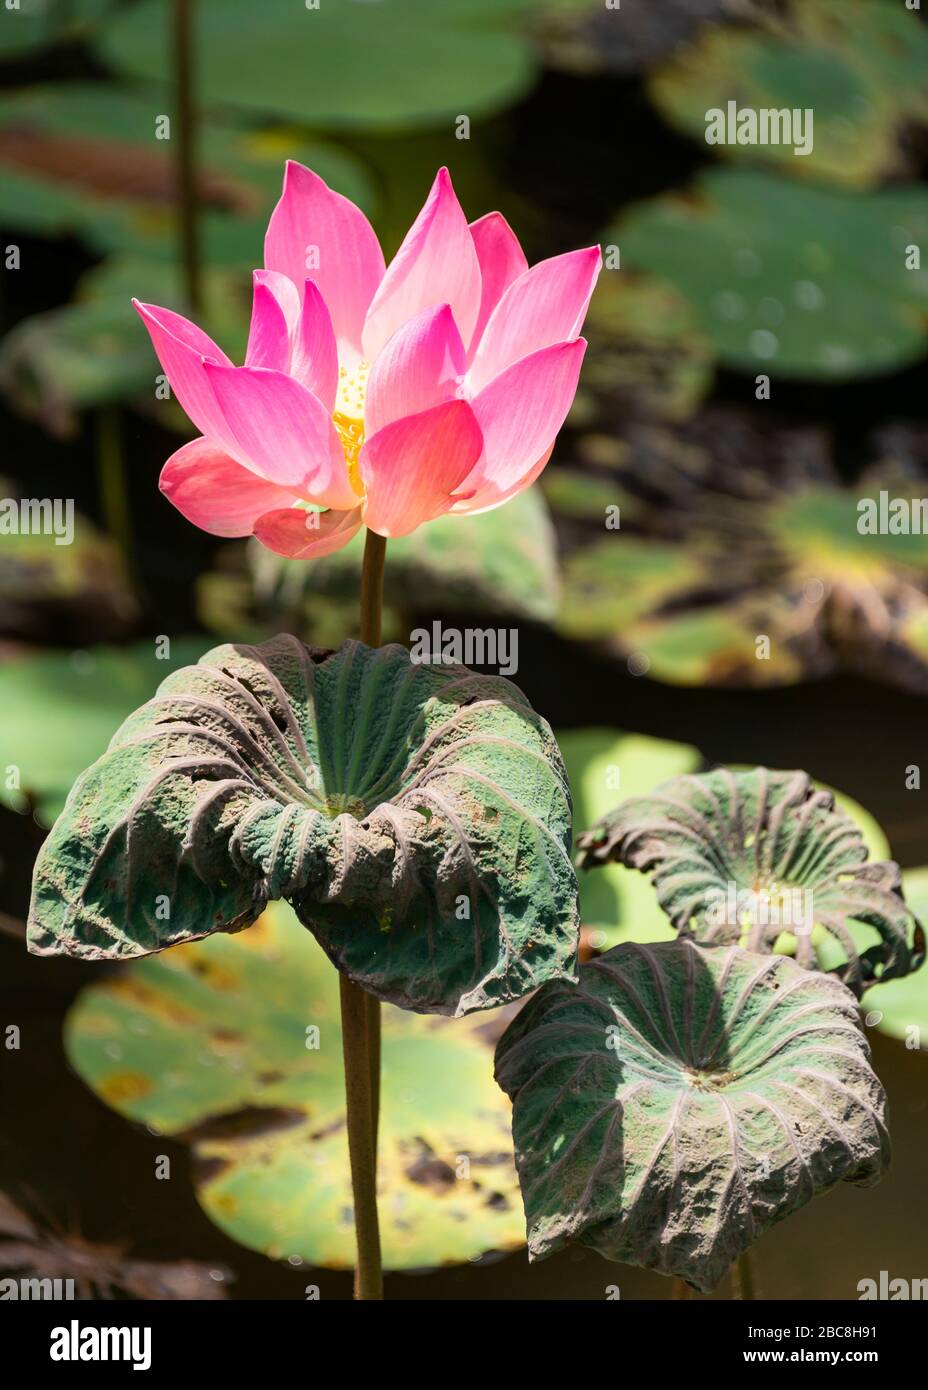 Vertical view of a pink water lily flower on a pond. Stock Photo